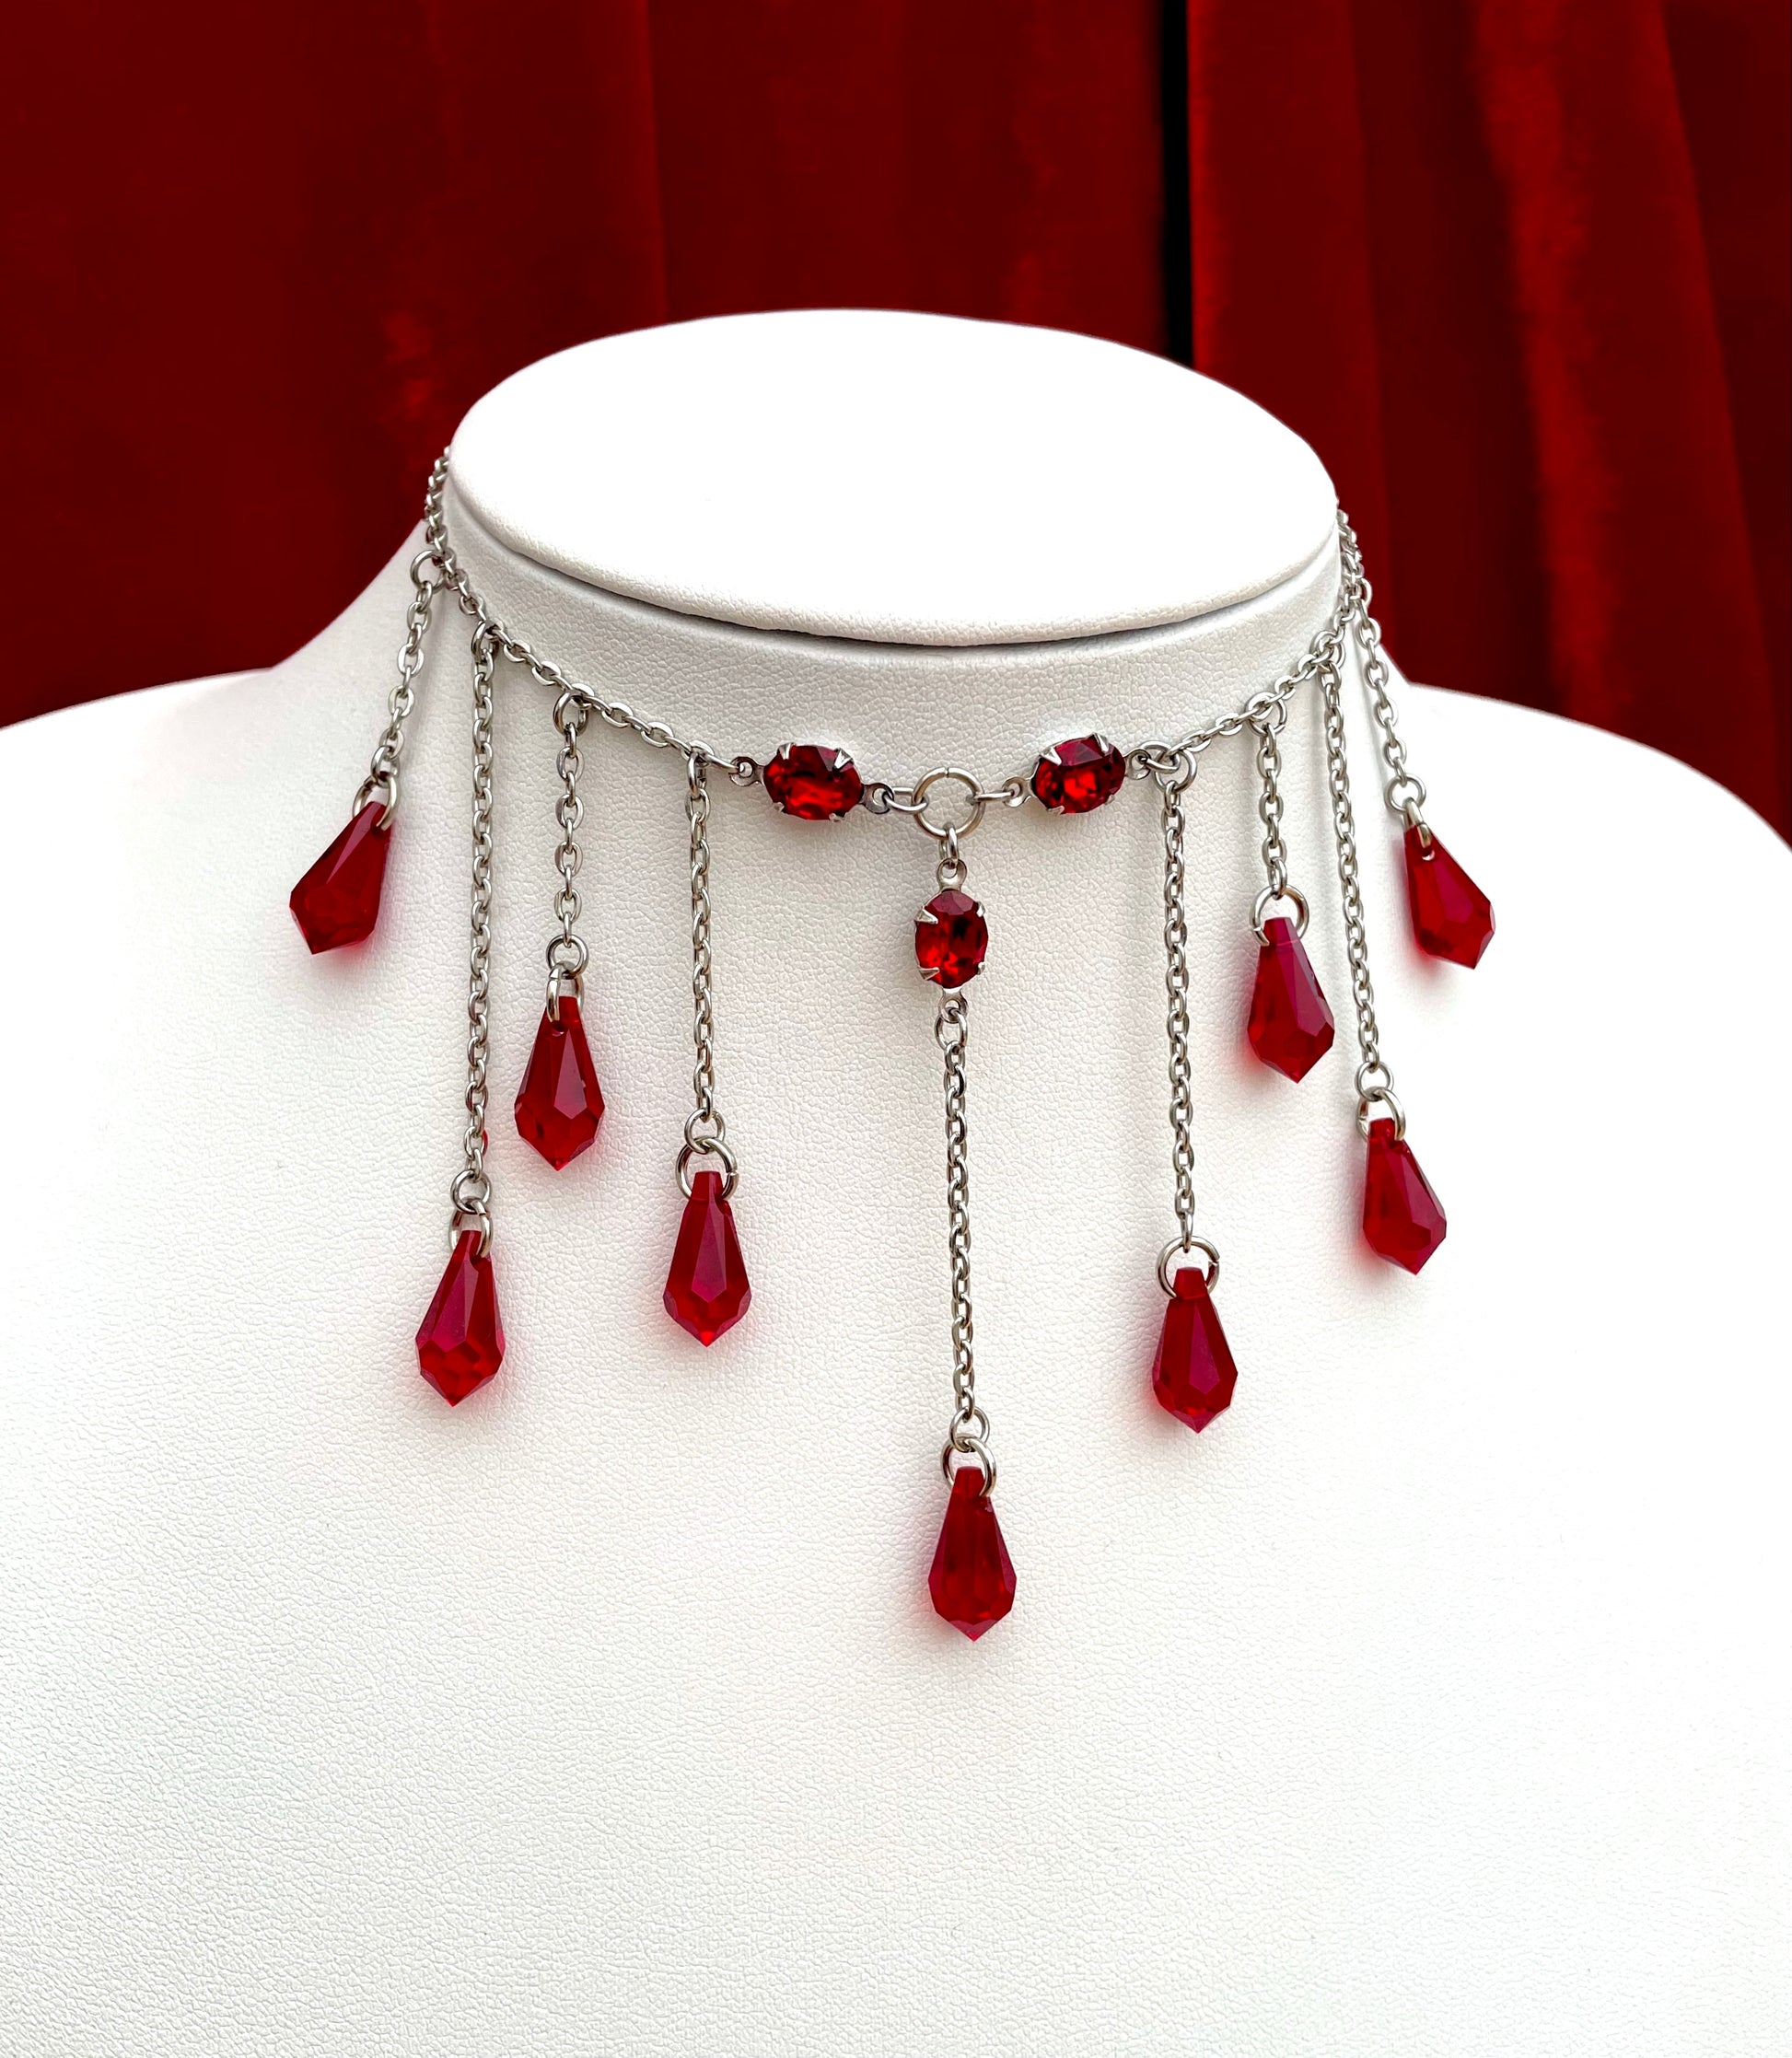 Dainty blood drop necklace, dainty necklace, dainty blood necklace, dainty drop necklace, dainty red drop necklace, Gothic drop necklace, red drop necklace, necklace with red drops, silver necklace with drops, gothic necklace, goth necklace, goth jeweller